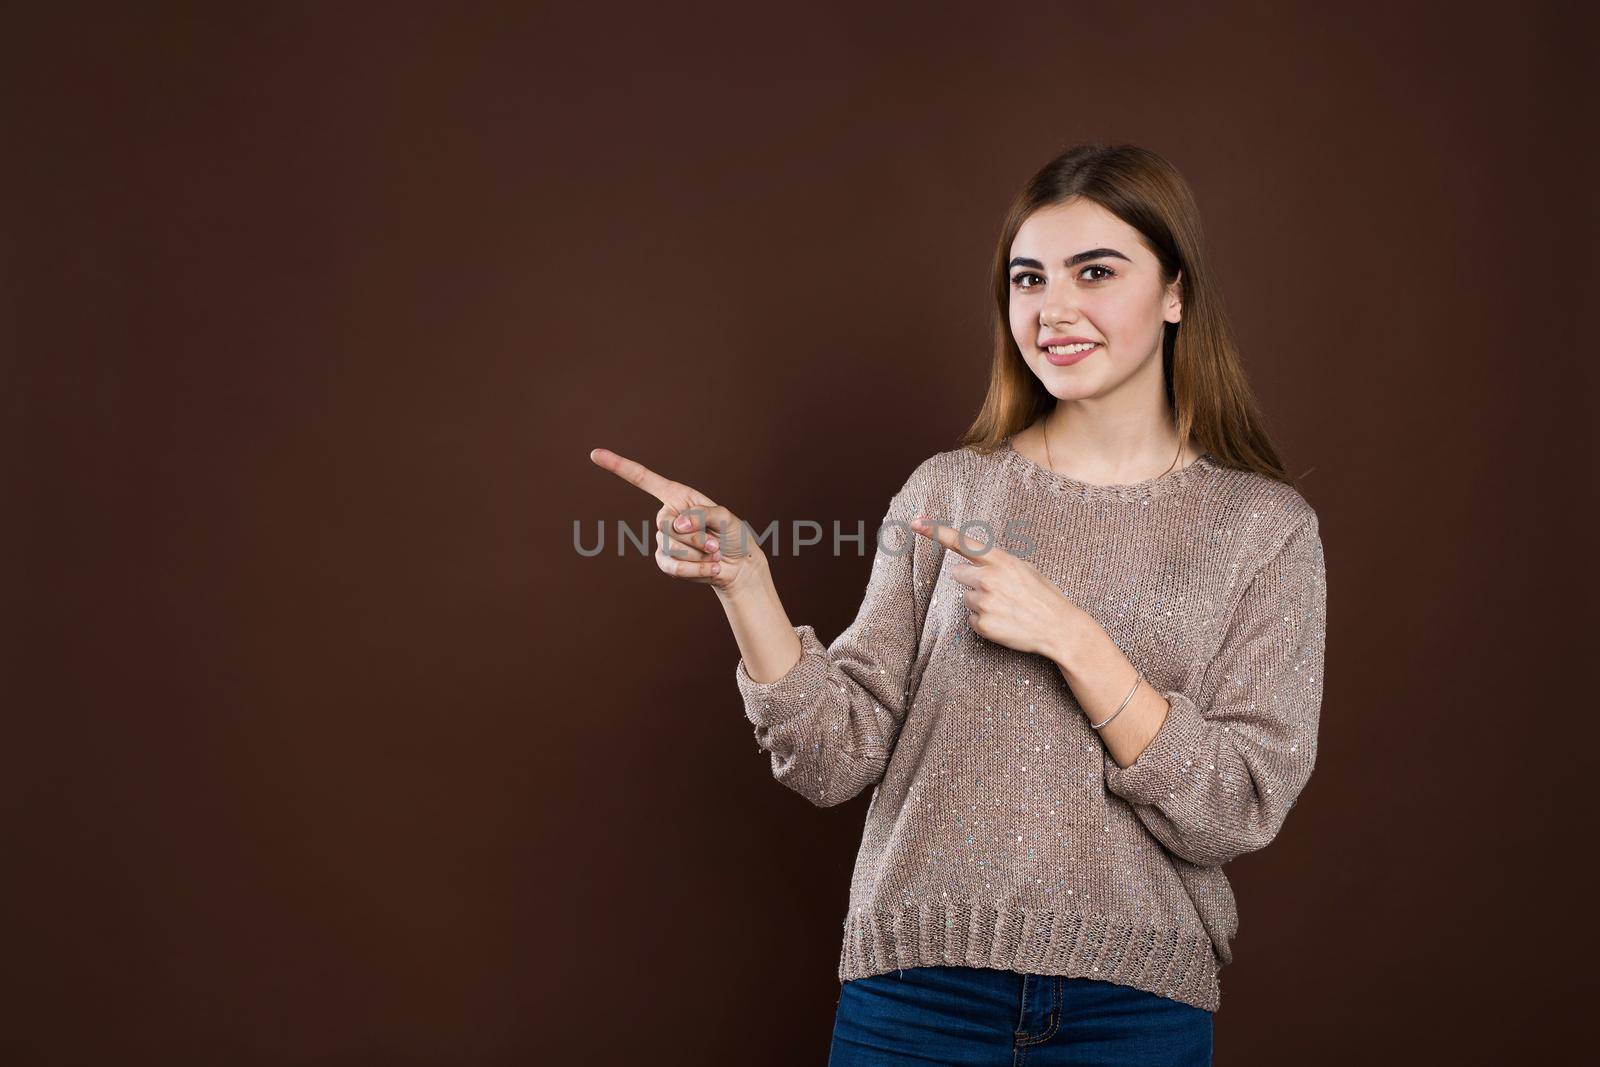 Smiling joyful woman in loose sweater posing against brown studio wall pointing at copy space for advertisment or promotional text. Positive emotions, feelings, joy, happiness. by StudioPeace